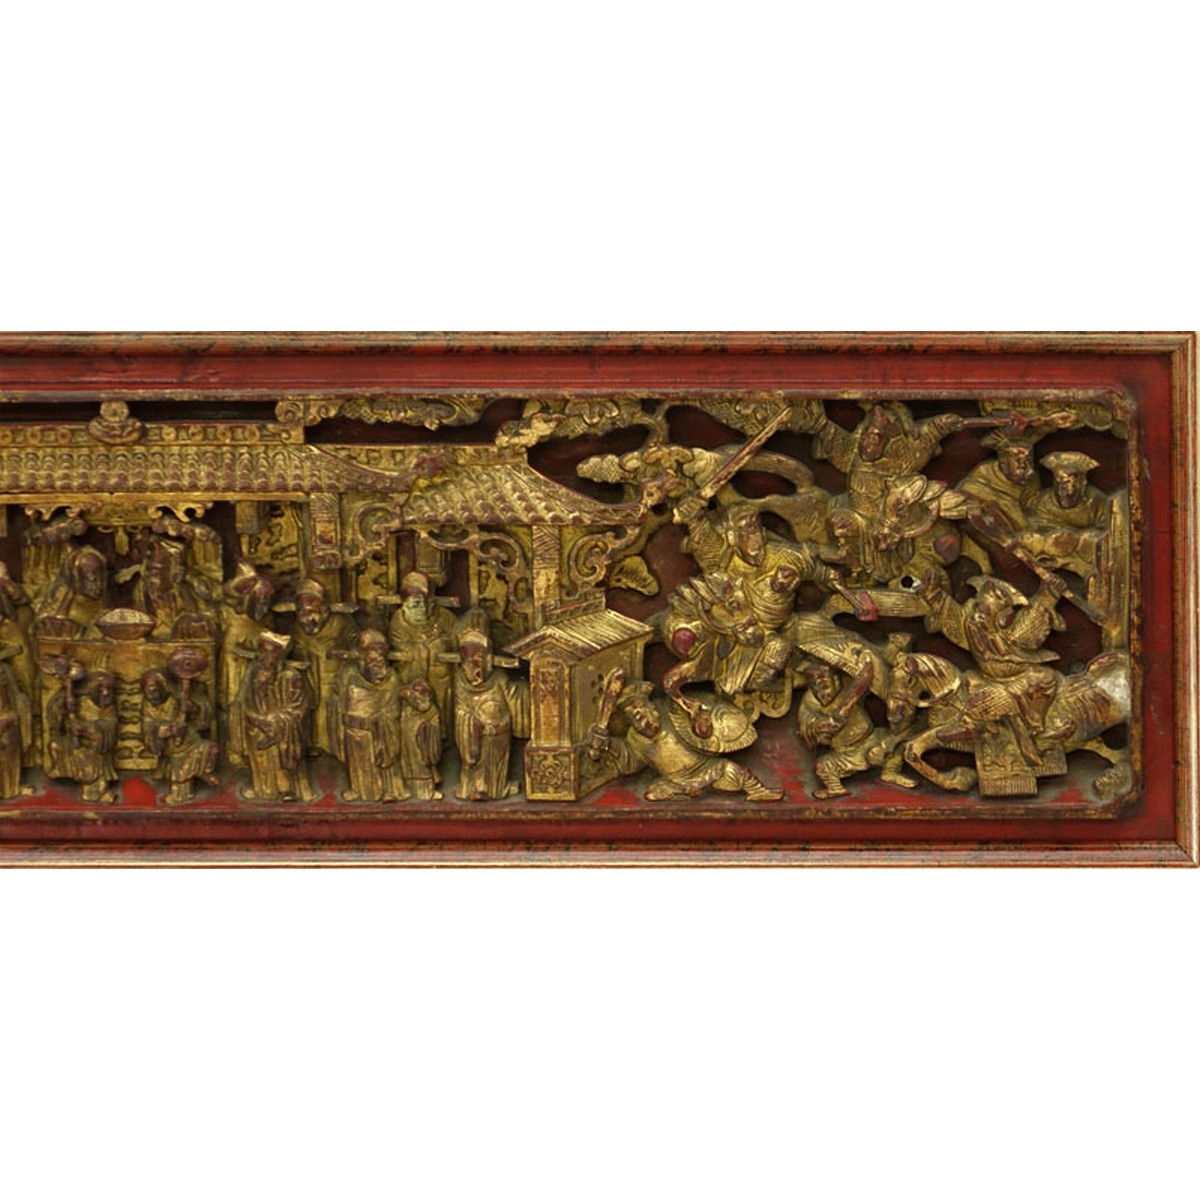 Chinese Gilt Painted and  Deep Relief Carved Wood Scenic Panel. Rubbing to gilt.